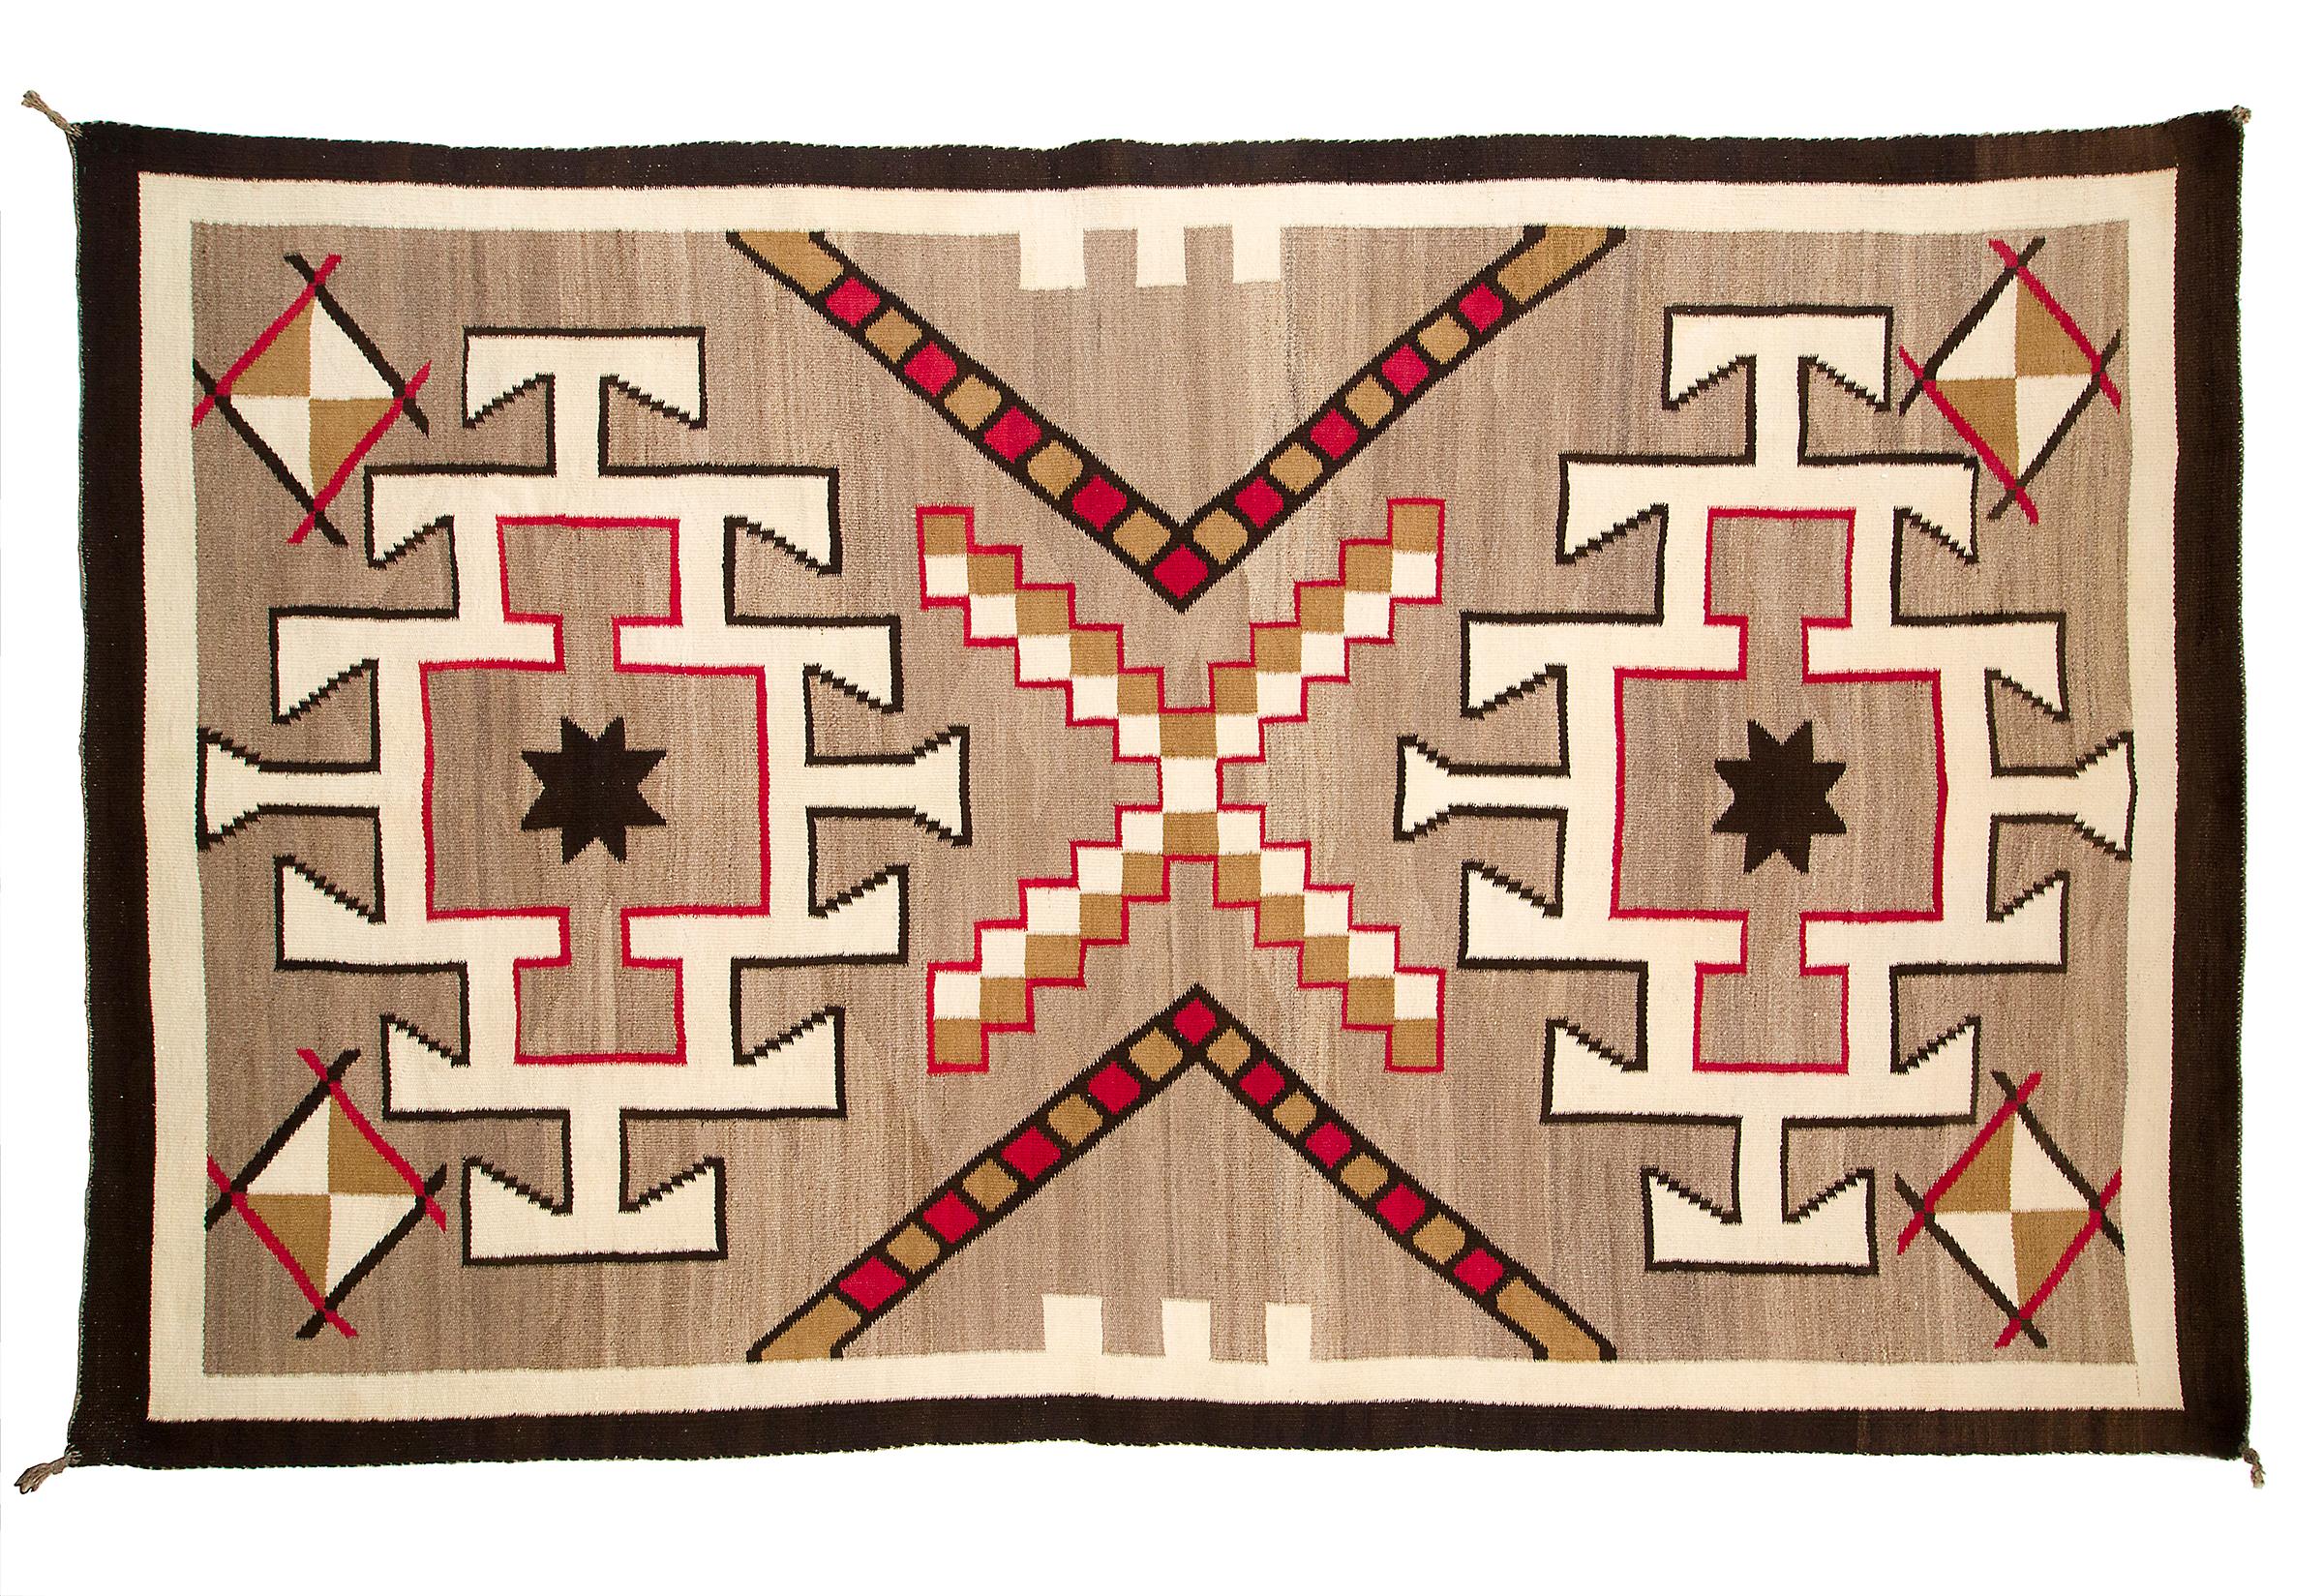 Vintage Navajo rug, circa 1930s, Trading Post era, woven of native hand-spun wool in natural fleece colors of brown/tan with a geometric pattern in white/ivory, black/brown and aniline-dyed red with stylized star. This weaving is well suited for use